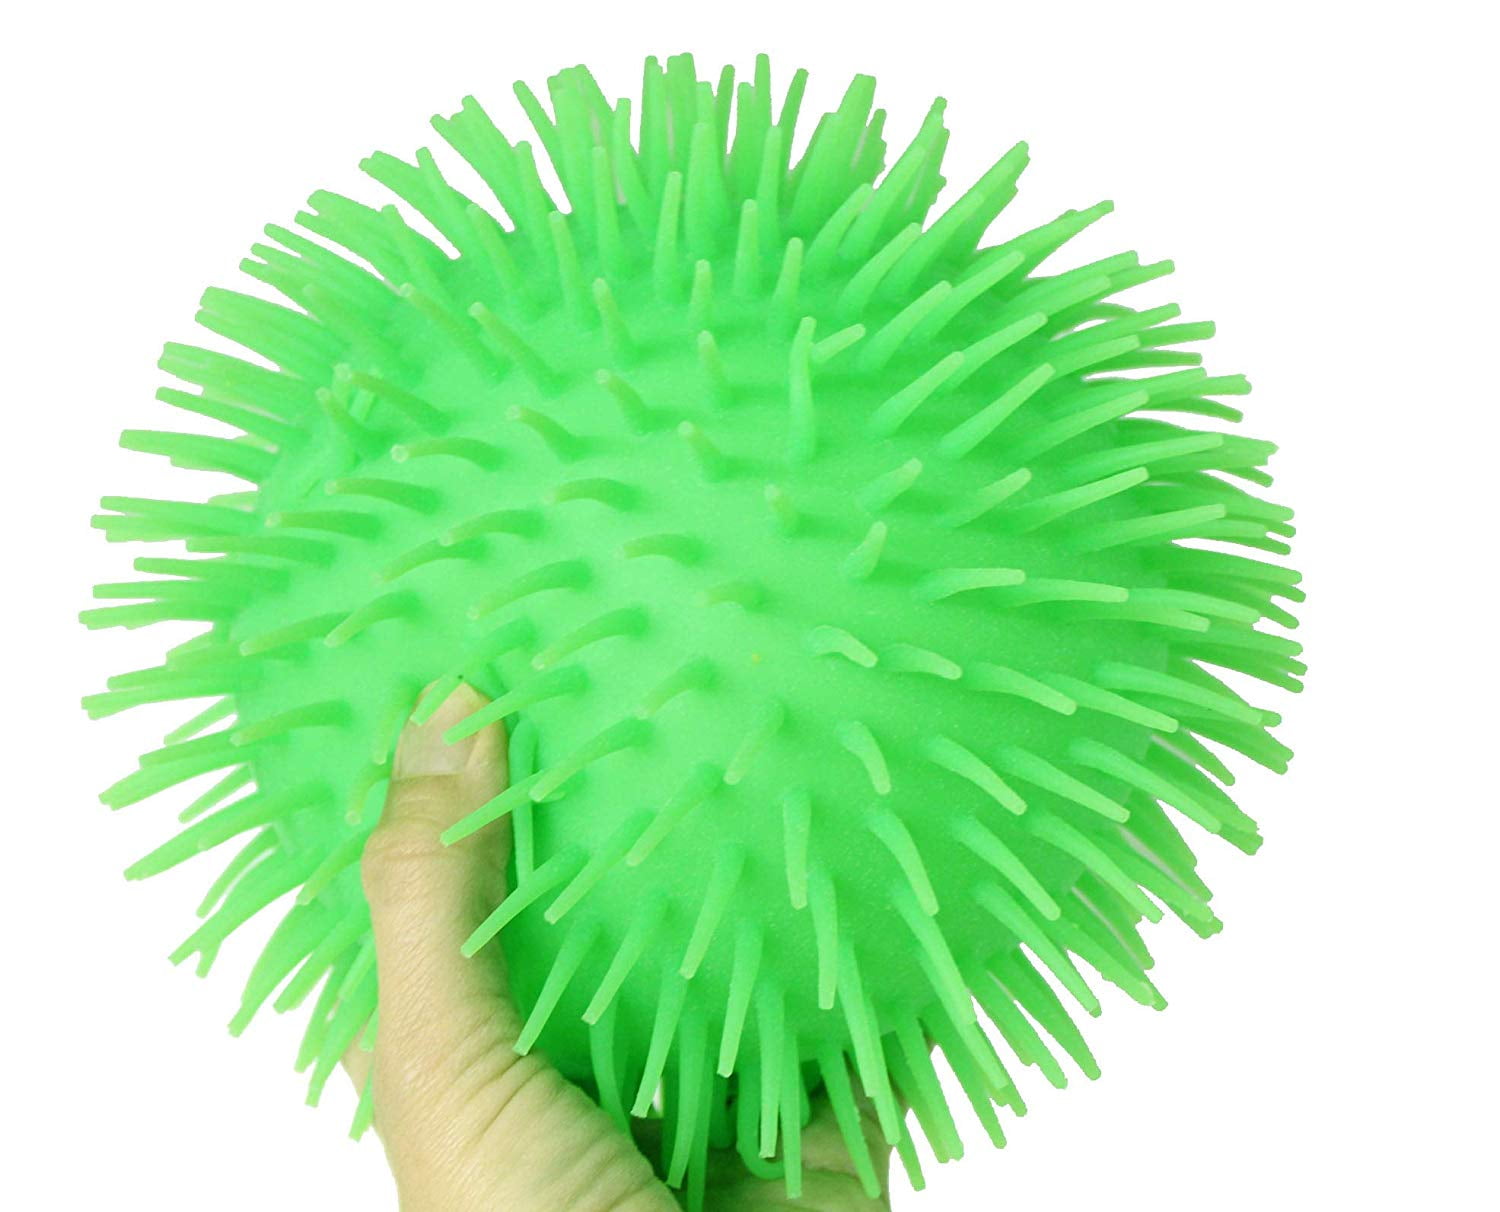 Large Sensory Tactile Squishy Hairy String Ball for Special Needs ADHD Autism 